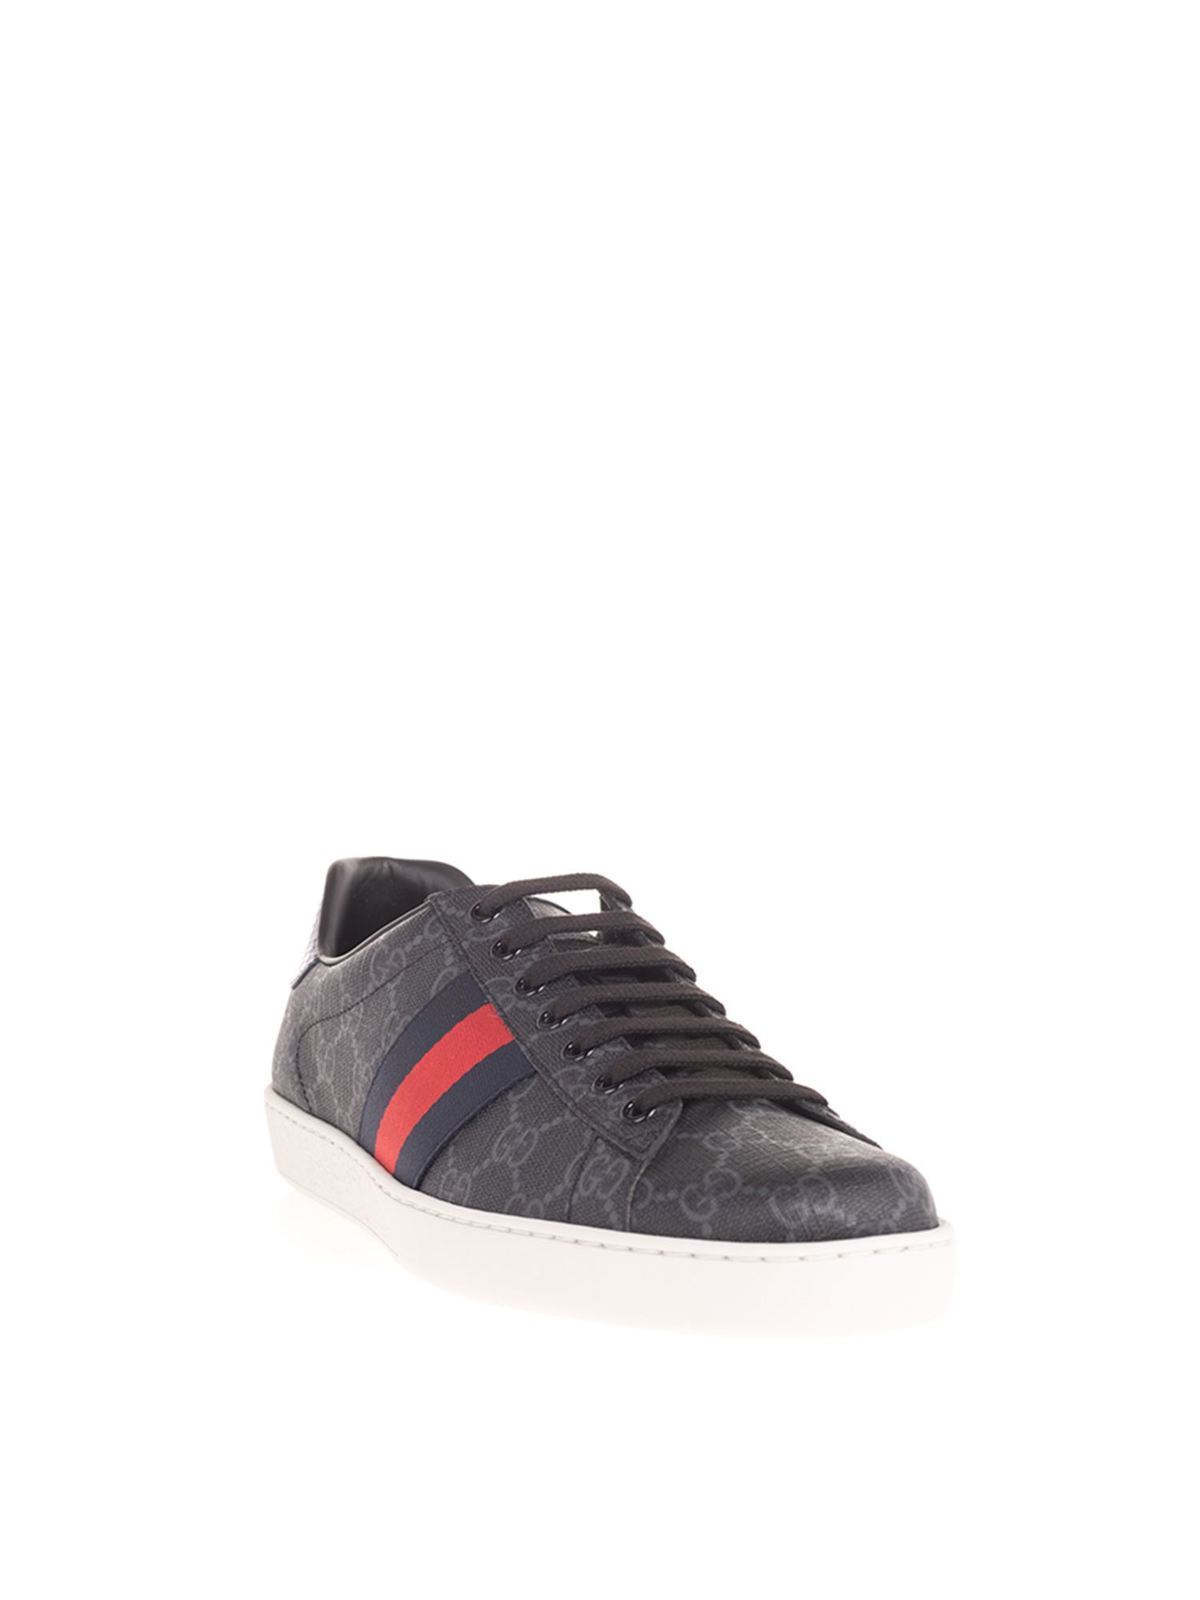 gucci trainers grey